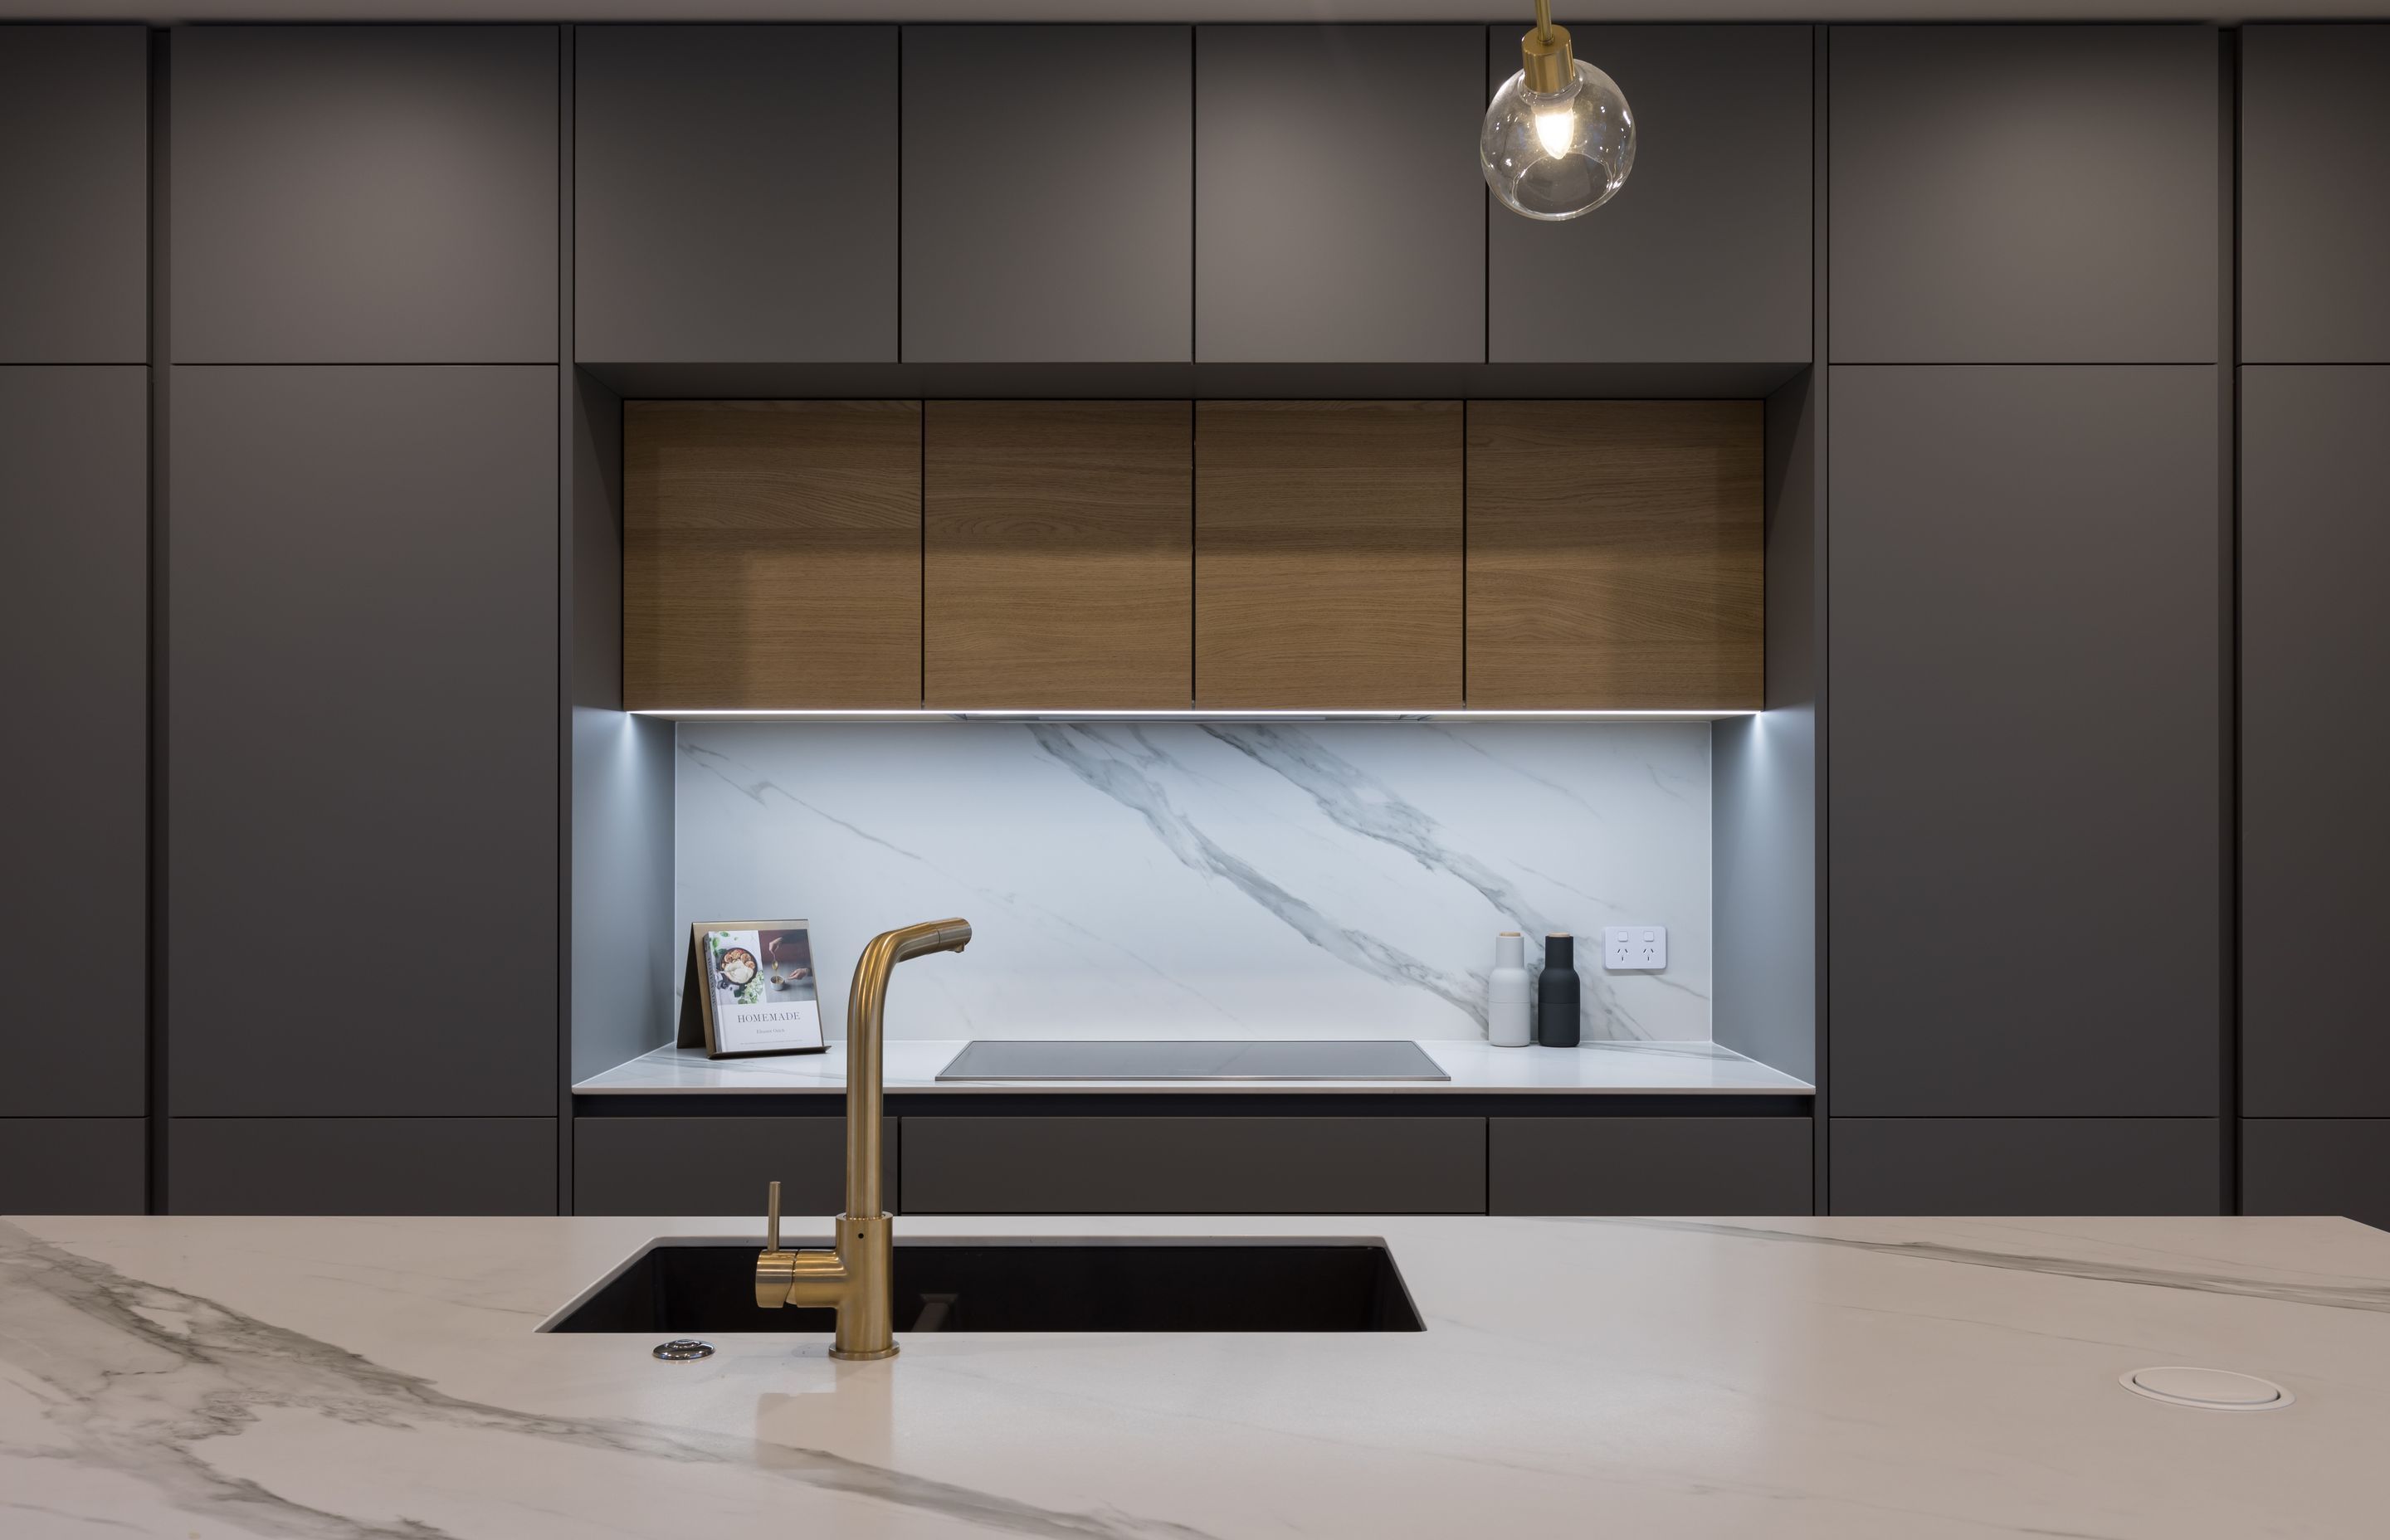 Full-height cabinetry from Poggenpohl's +Segmento range, featuring push-release hardware, imparts a streamlined feel and allows for appliances to be fully integrated.